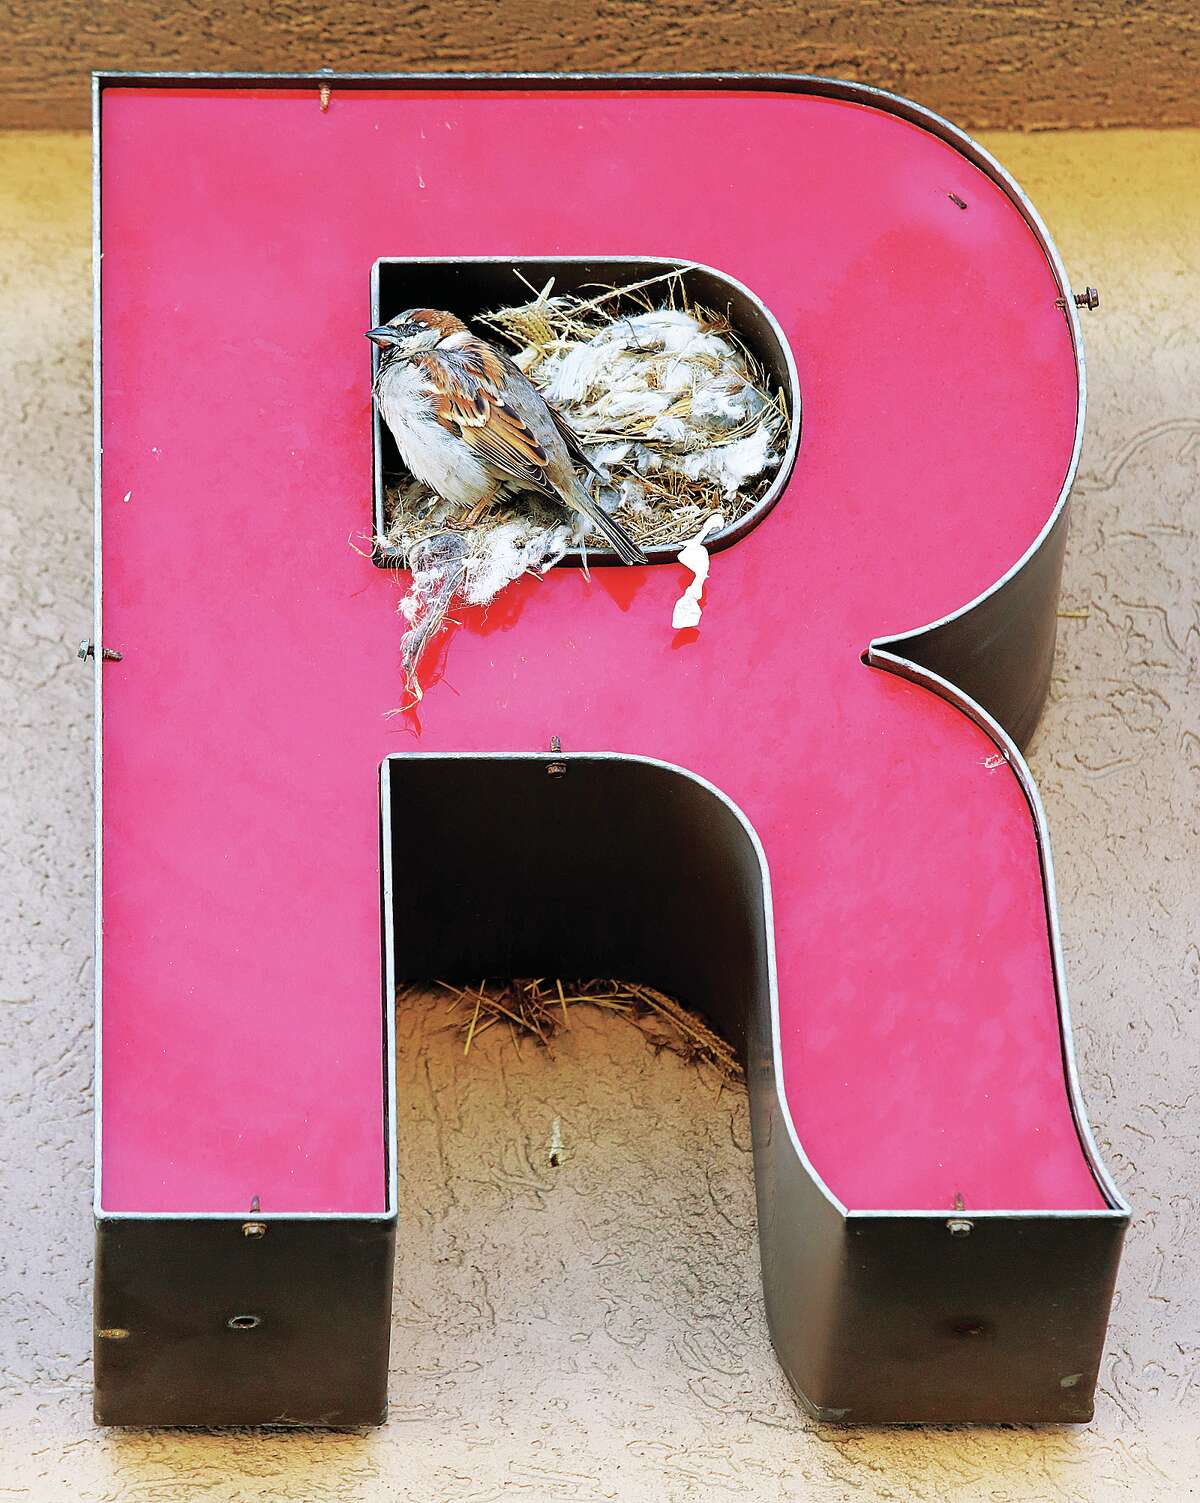 John Badman|The Telegraph R is for roosting, at least it seemed that way for a small bird standing by the home he built in the letter R of the Walgreens sign at 1650 Washington Ave. in Alton. The space seemed to be just the right size. As the cold weather continues don't forget your feathered friends, especially when snow covers the ground.